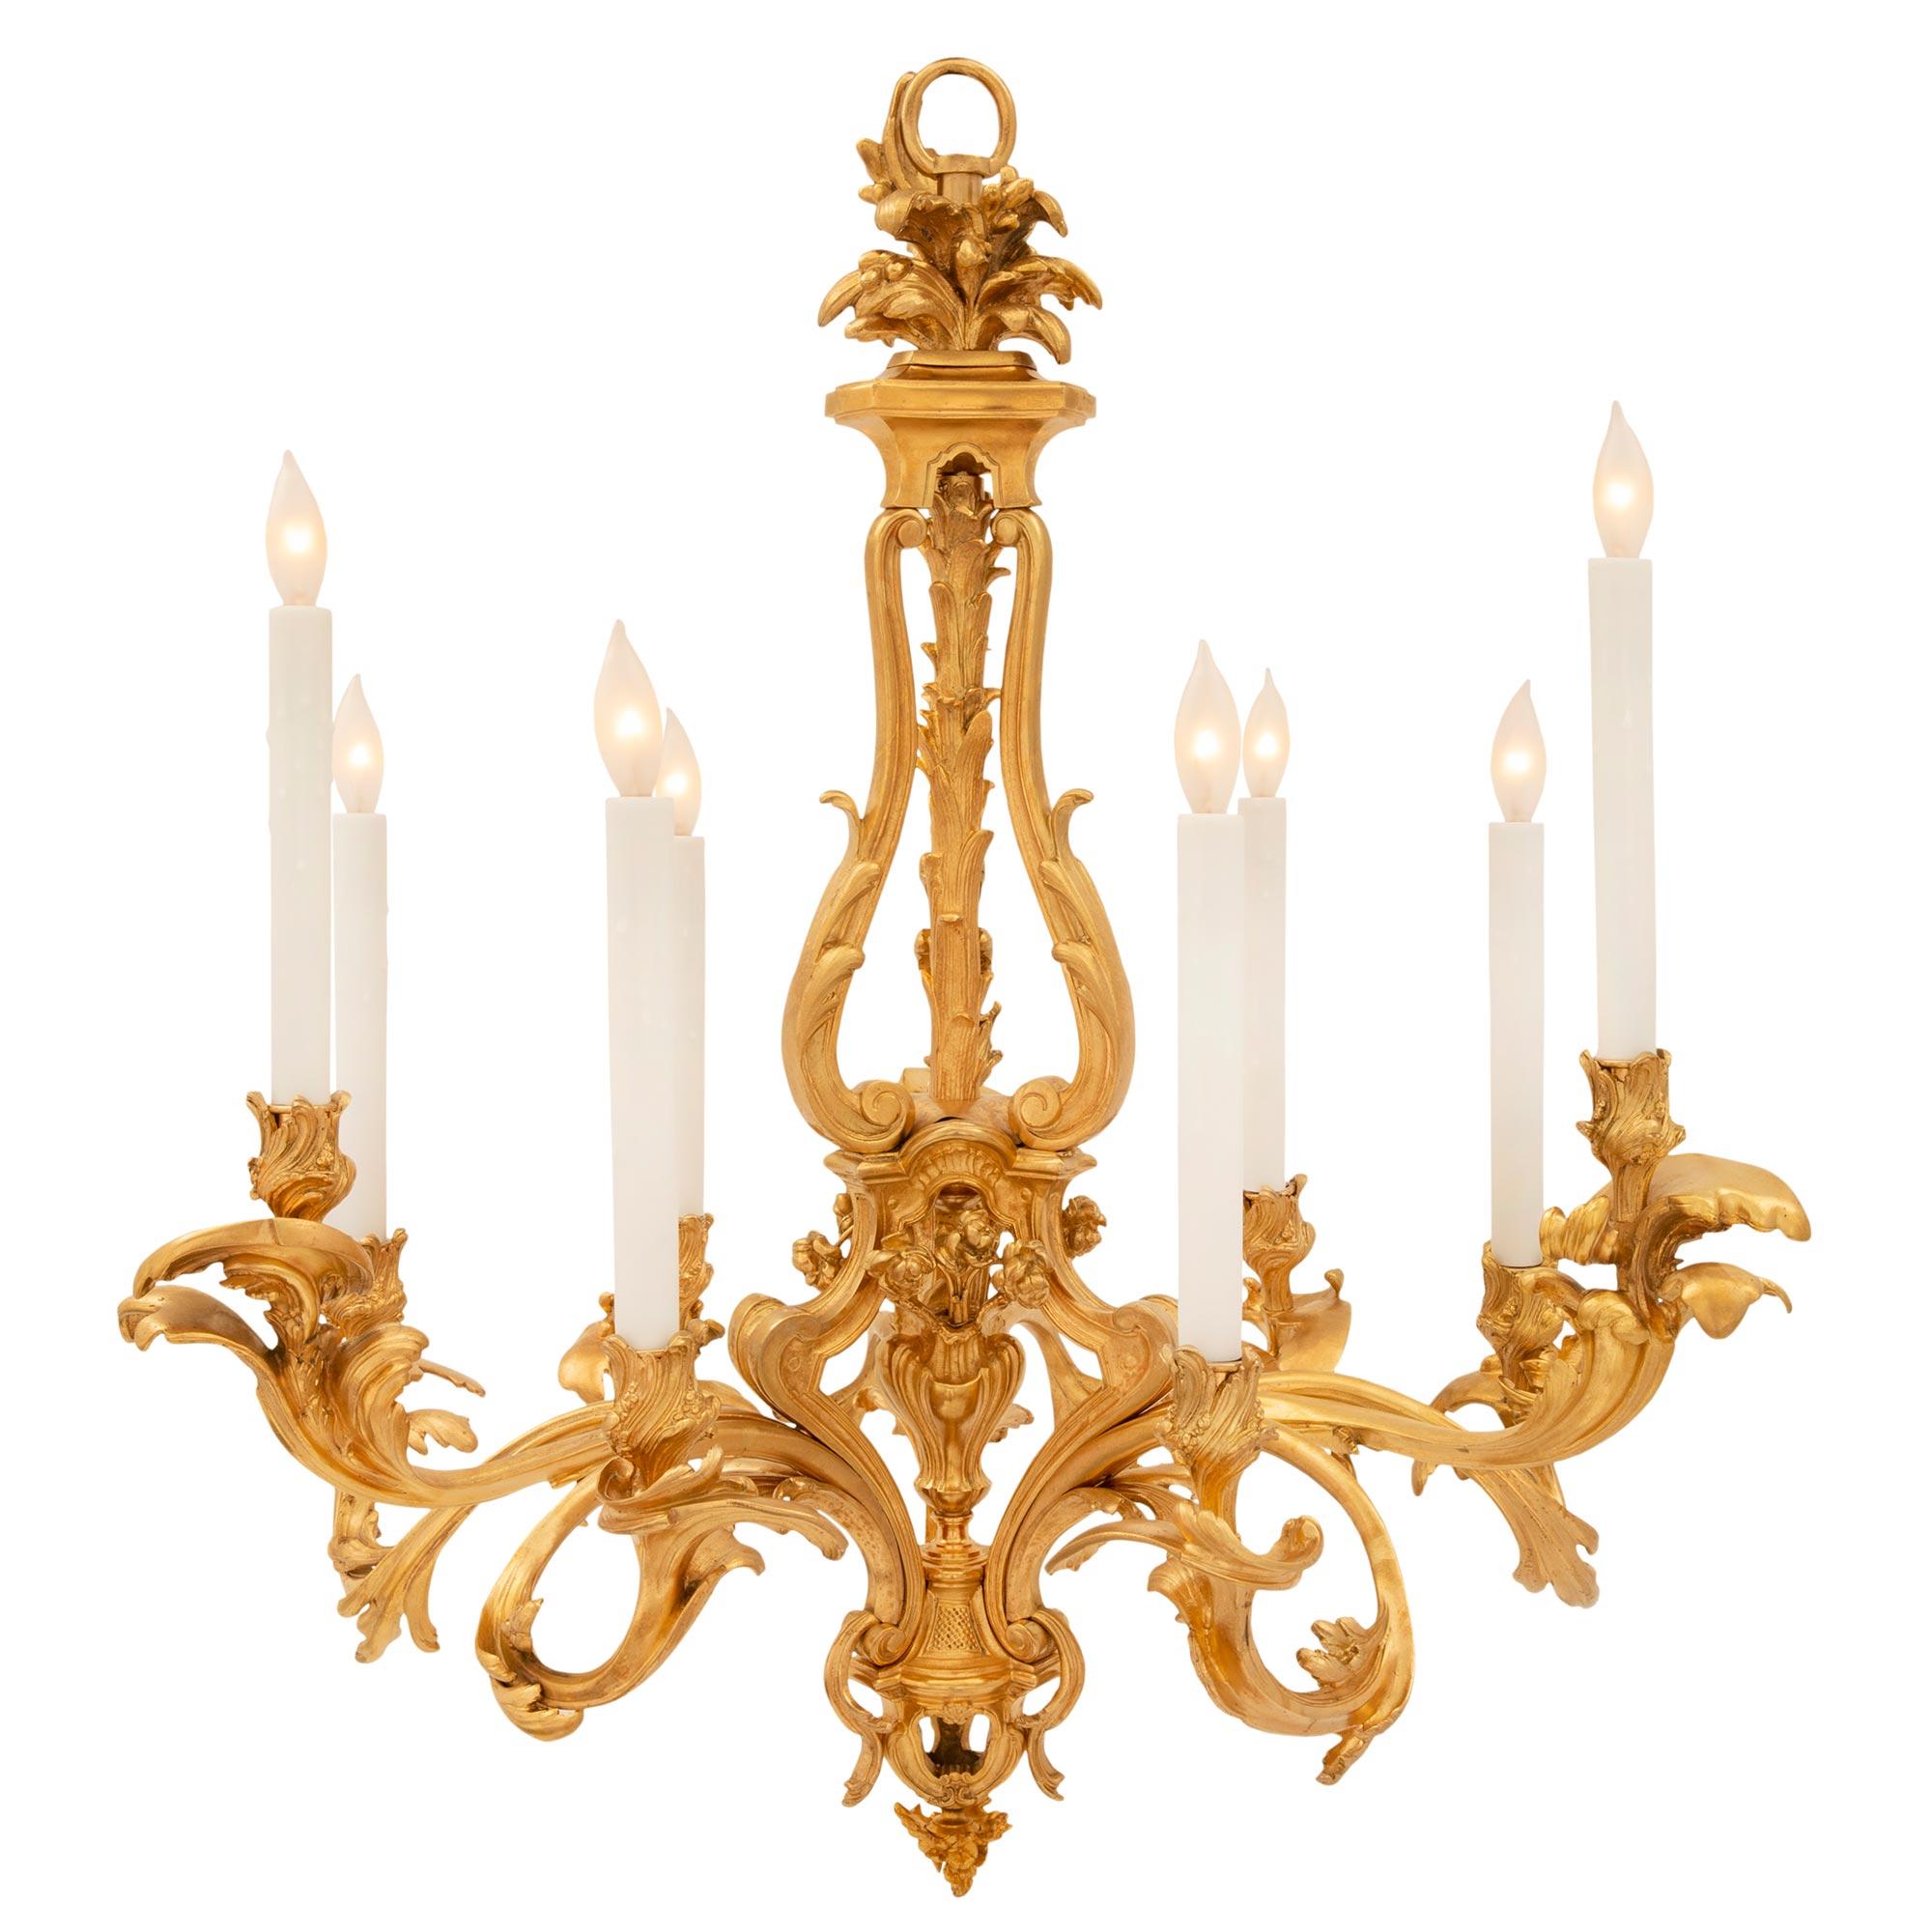 A stunning and extremely unique French 19th century Louis XV st. ormolu chandelier, signed by Vian and after a model by Jean-Jacques Caffieri. The nine arm chandelier is centered by a striking bottom floral finial below beautiful scrolled foliate